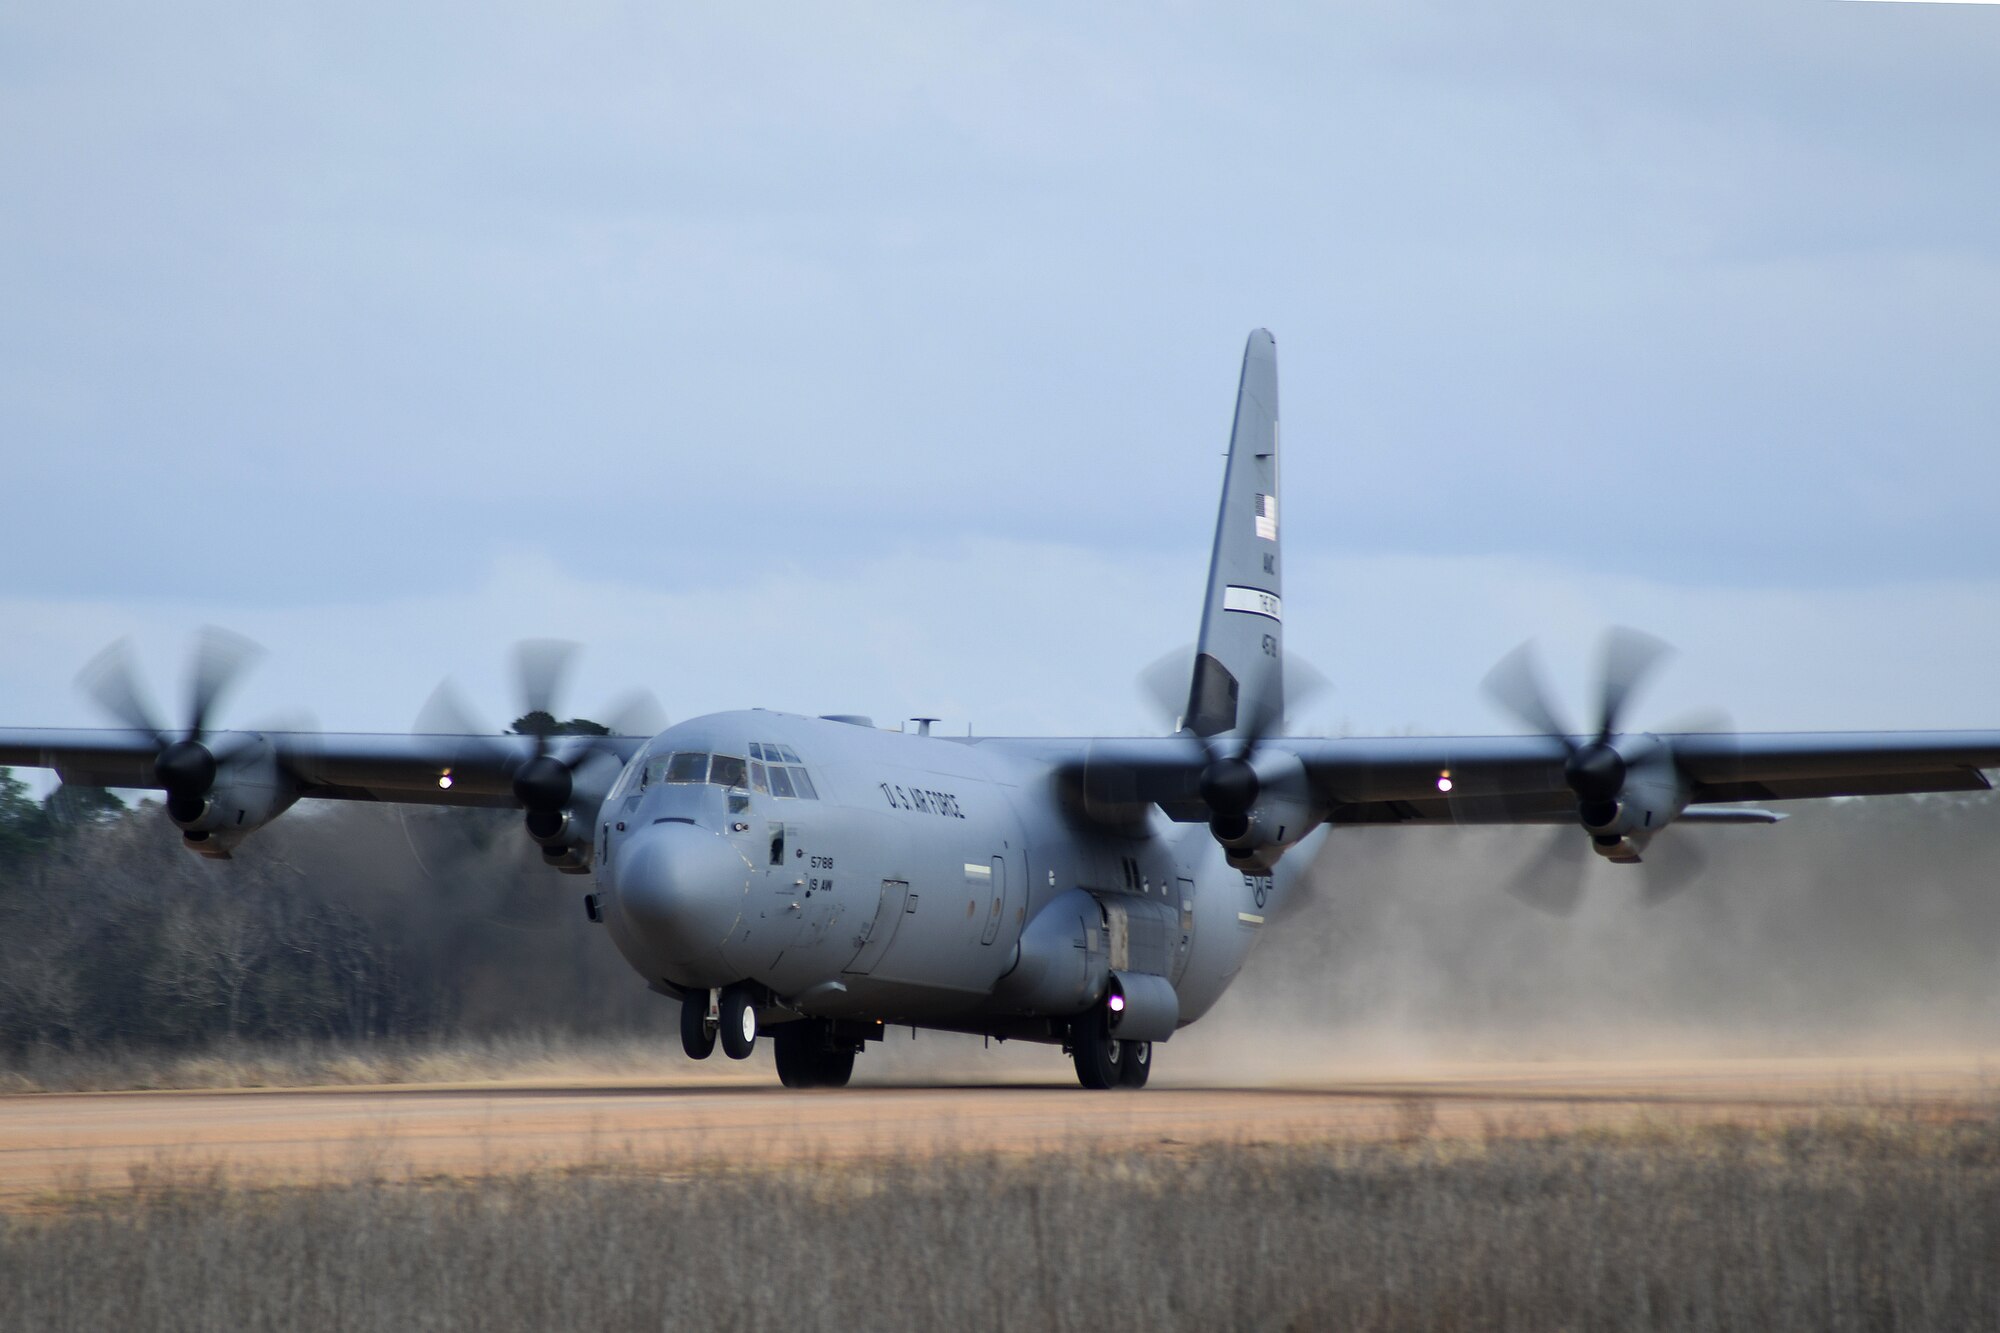 A C-130 Hercules aircraft from Little Rock Air Force Base, Ark., departs Geronimo Landing Zone during a mission in support of Green Flag Little Rock exercise, Feb. 11, 2019, Fort Polk, La. The primary objective of the exercise is to support the Joint Readiness Training Center and provide the maximum number of airlift crews, mission planners and ground support elements to a simulated combat environment with emphasis on joint force integration. (U.S. Air Force photo by Tech. Sgt. Liliana Moreno)